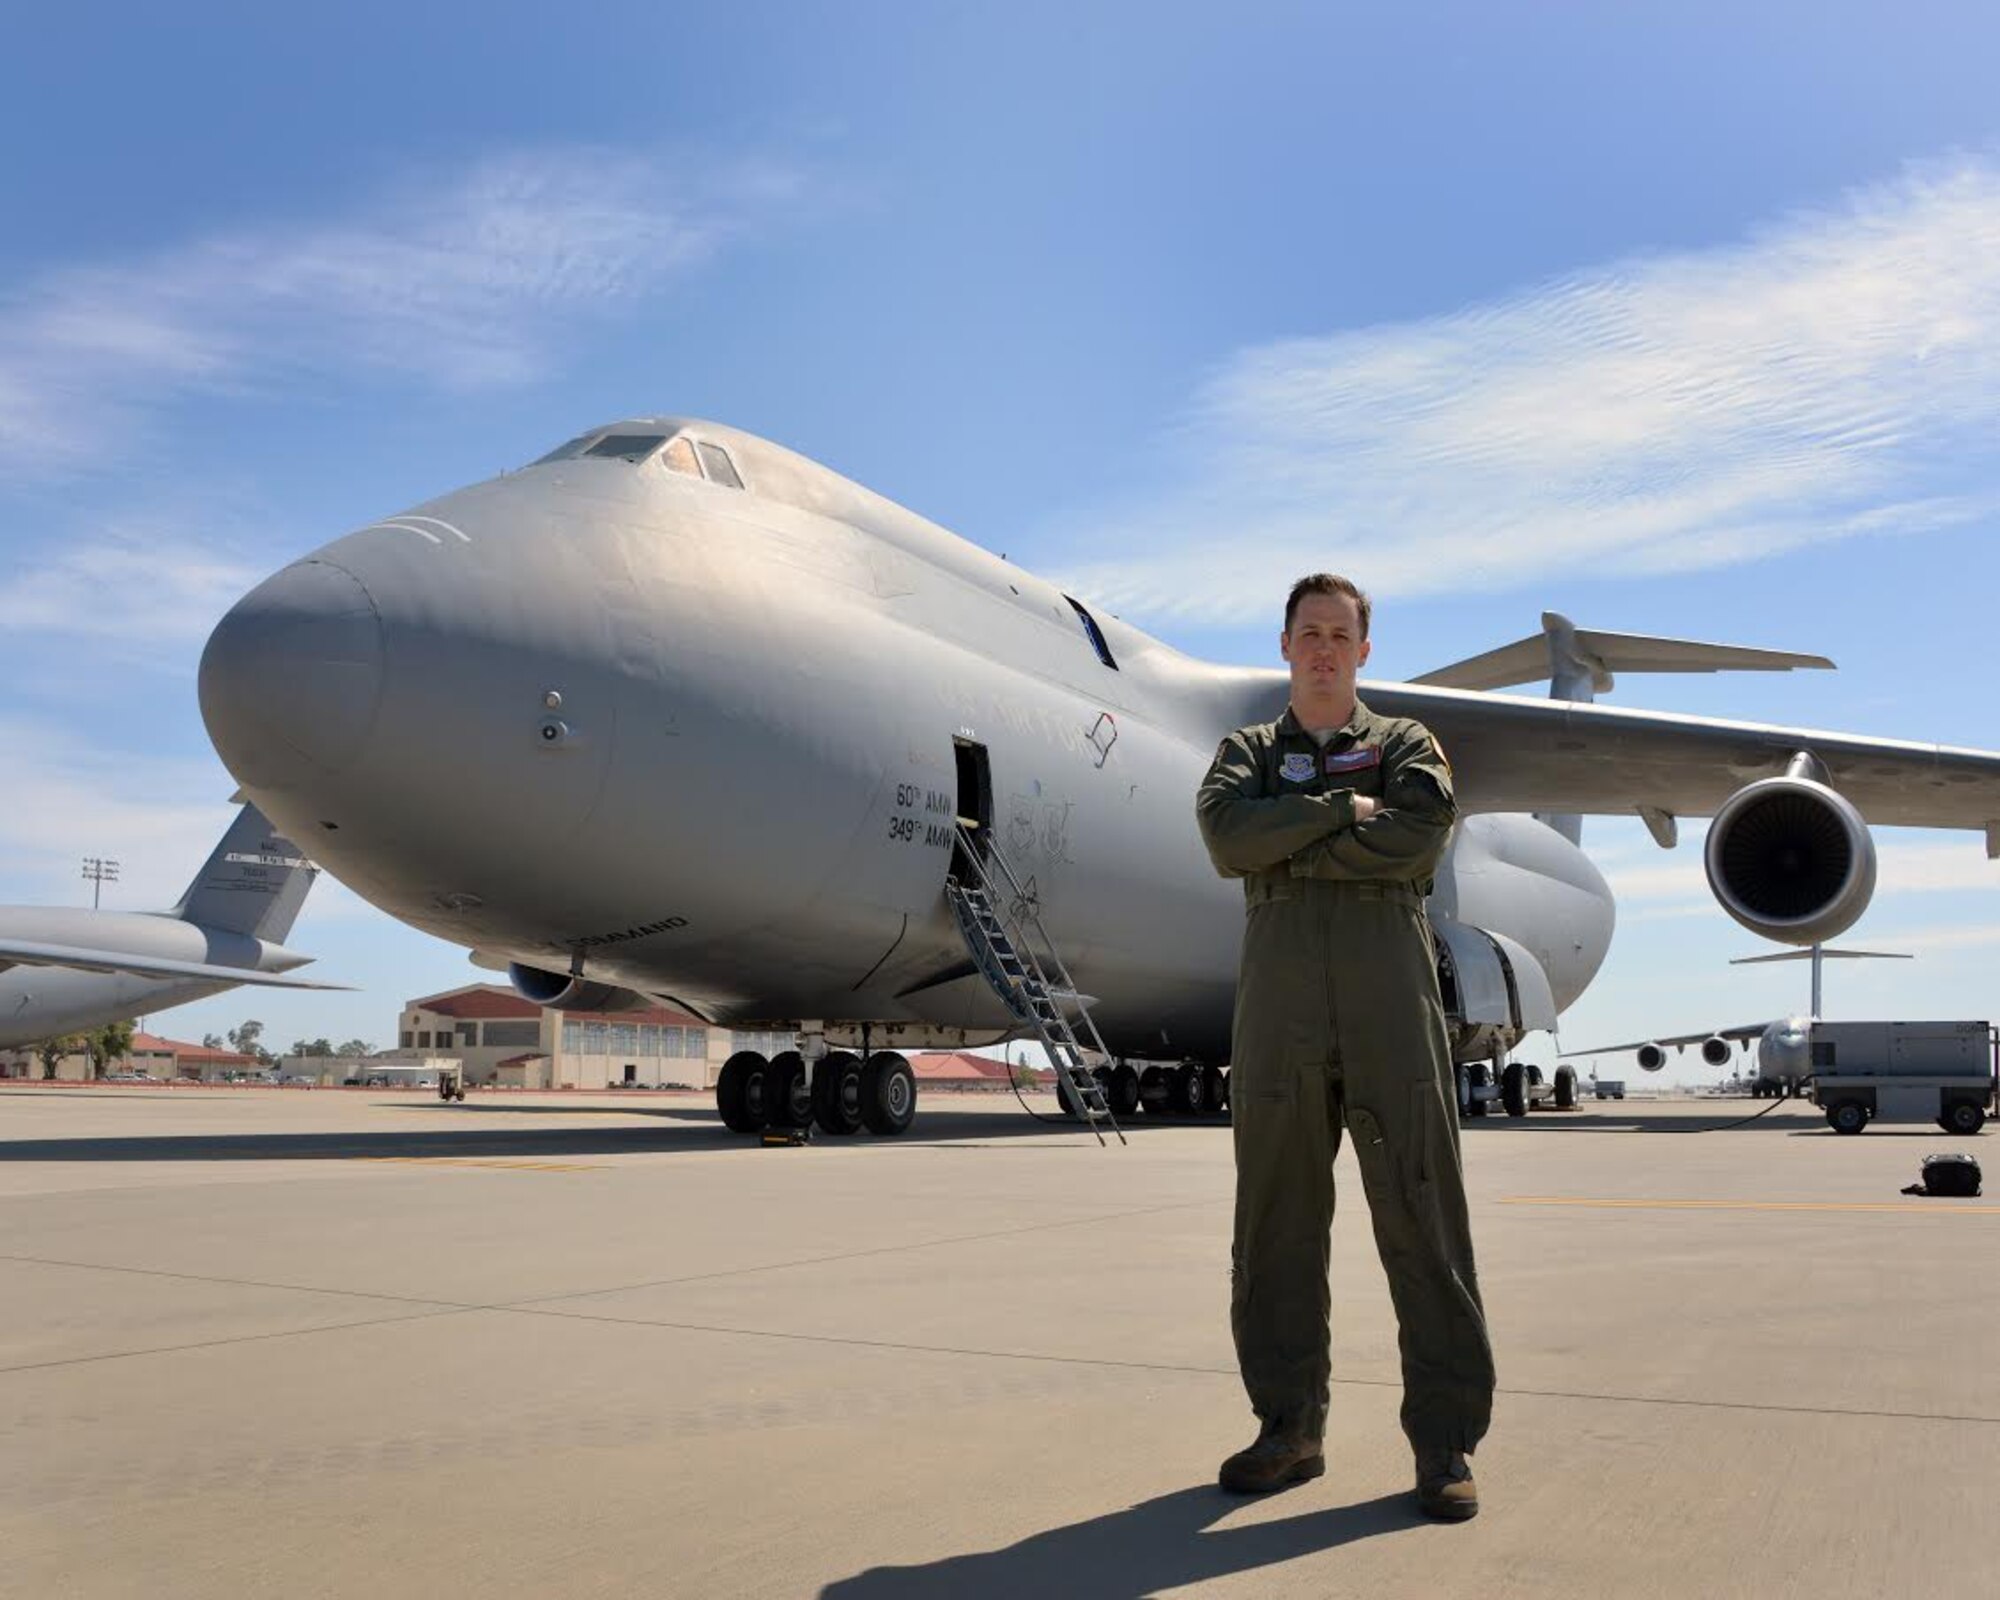 U.S. Air Force Staff Sgt. Oliver Broadbent, 22nd Airlift Squadron loadmaster, poses for a photo in front of a C-5M Super Galaxy June 6, 2017, at Travis Air Force Base, Calif. After overcoming Follicular non-Hodgkin lymphoma, it took nine additional months to regain his qualification and flying status as an Air Force loadmaster. (U.S. Air Force photo by Staff Sgt. Charles Rivezzo)  